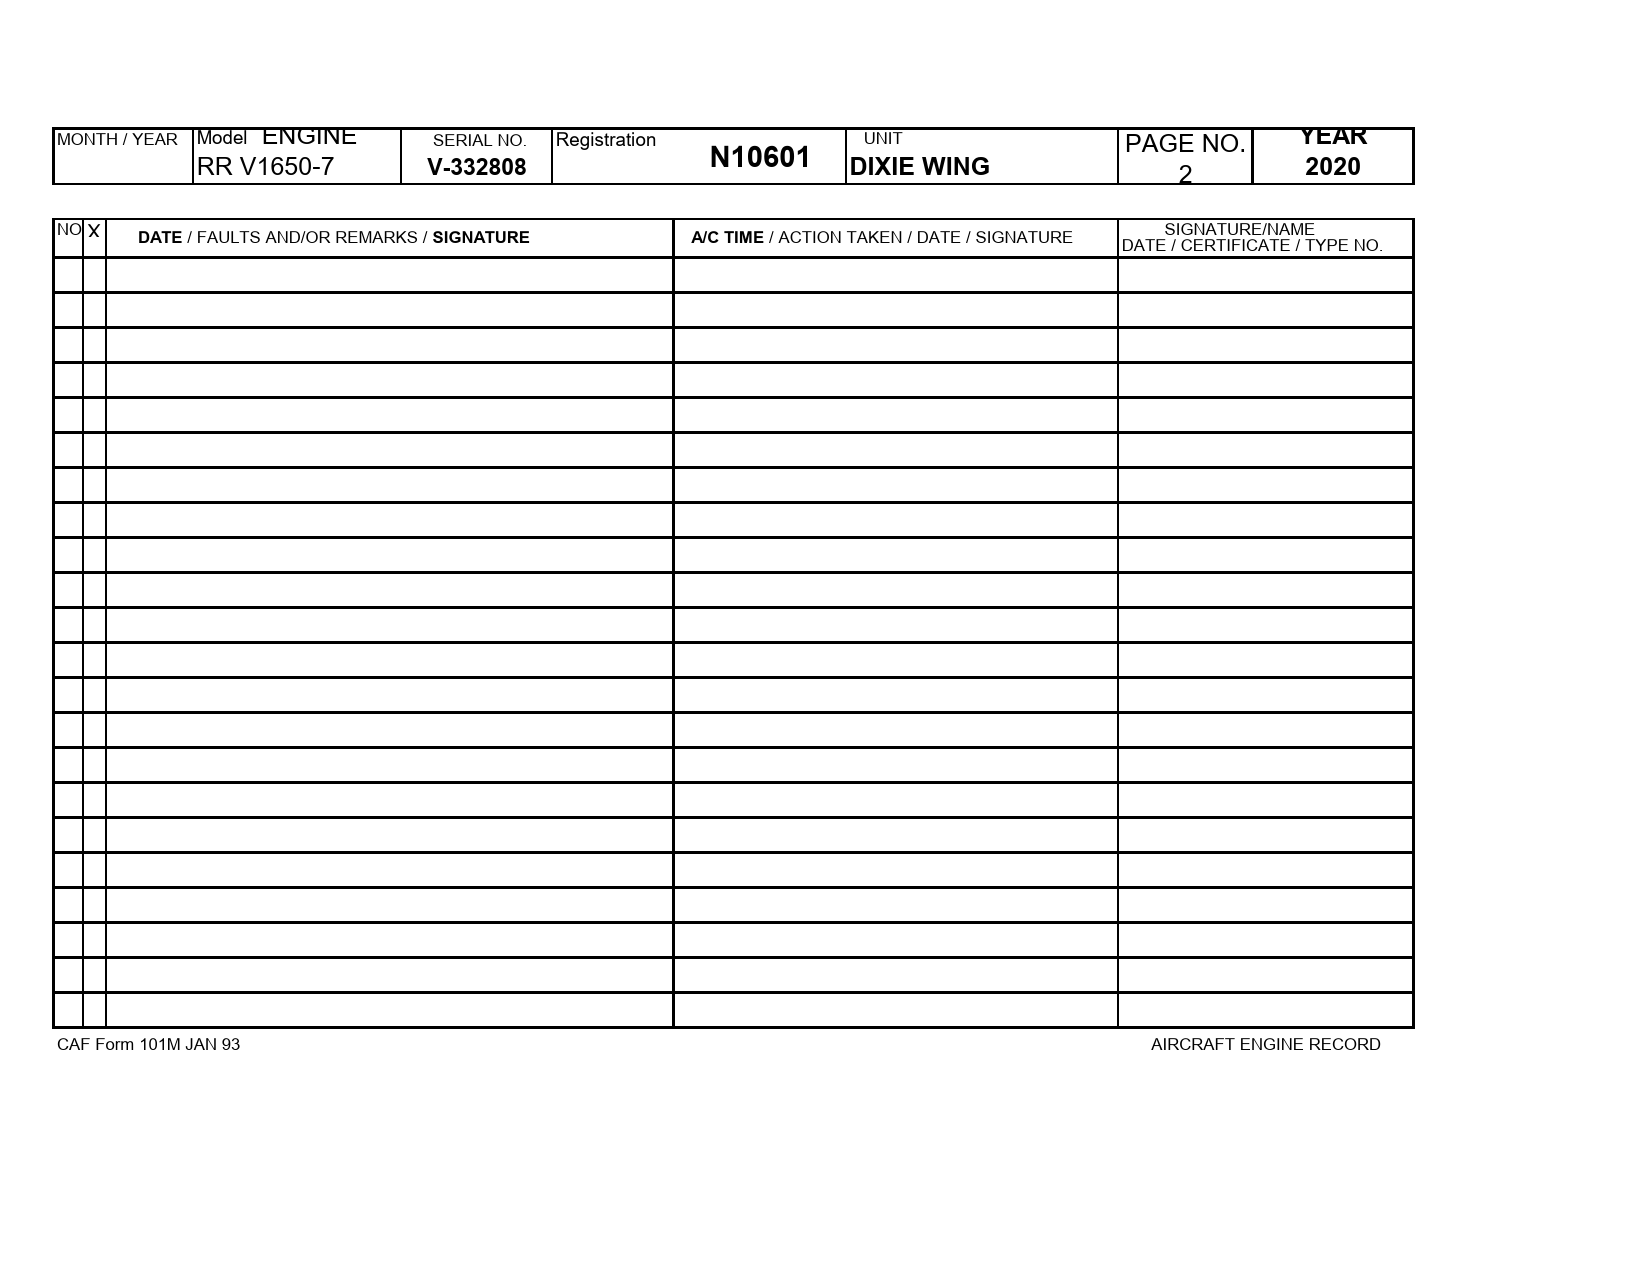 Sample page 1 from AirCorps Library document: Engine Maintenance Log Form